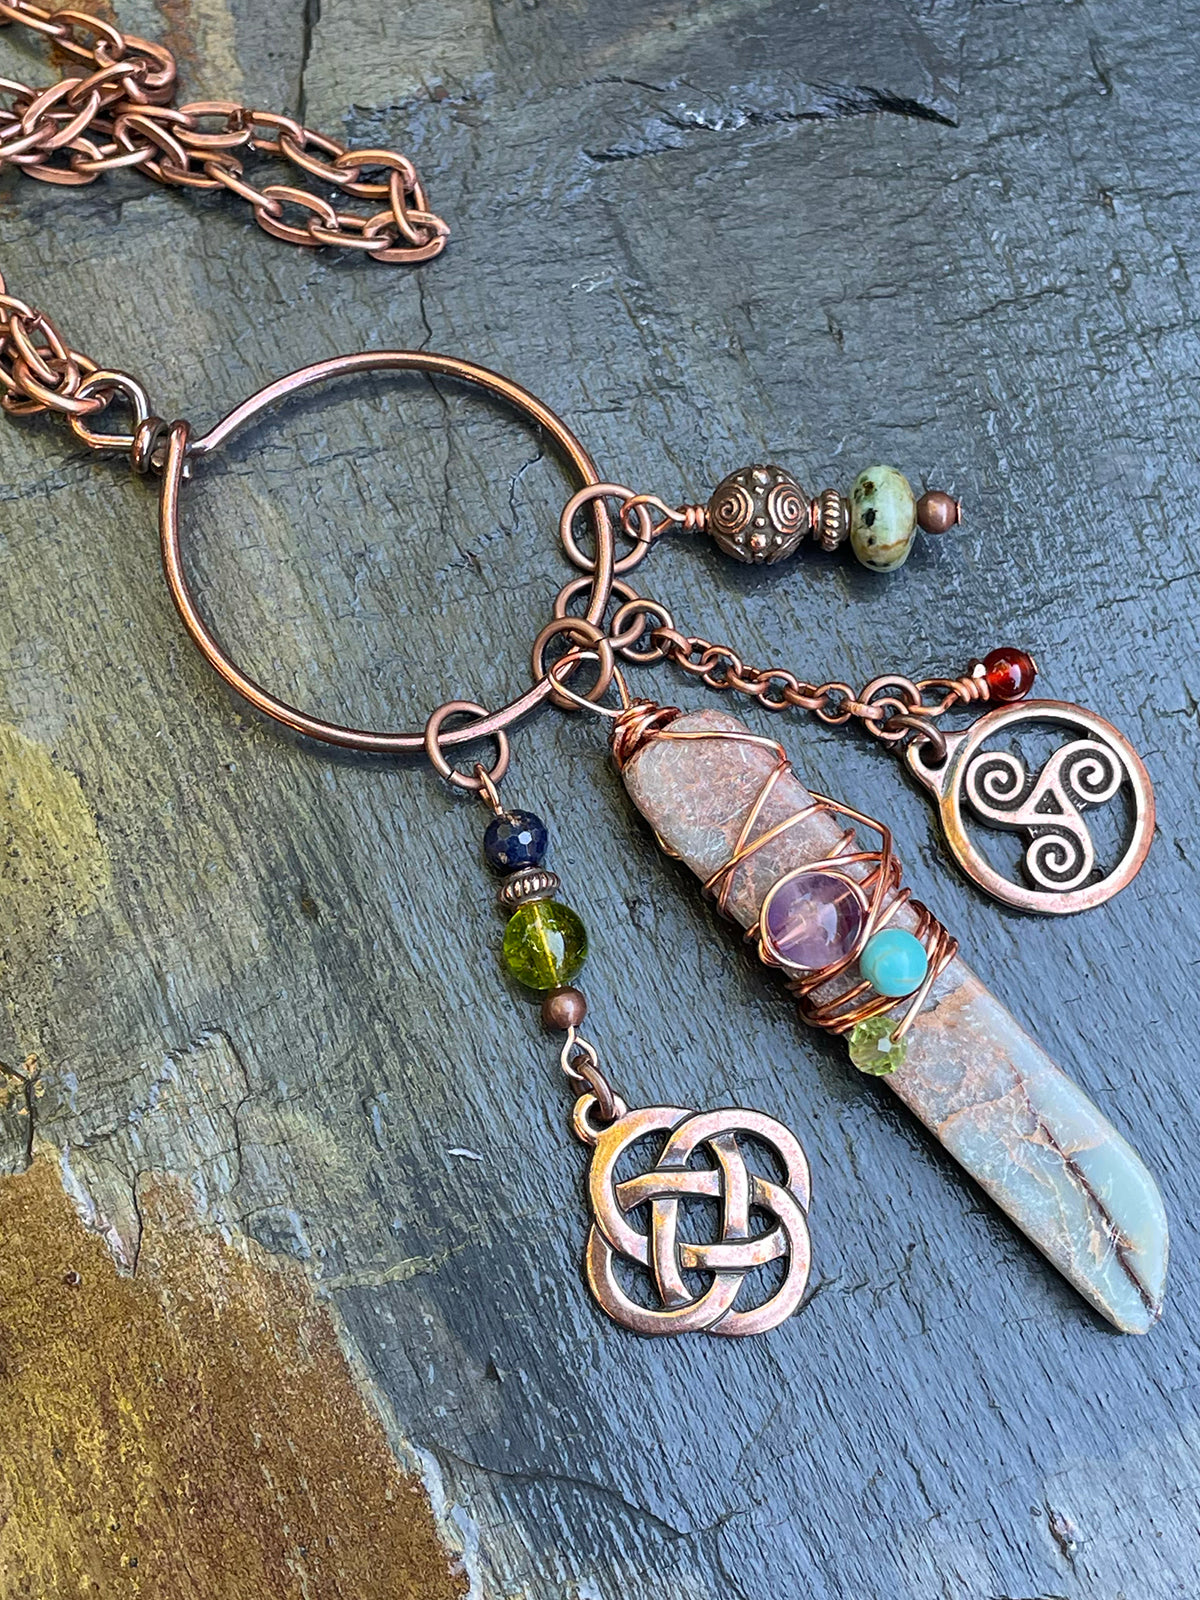 Red copper metal with gemstones that include peridot, carnelian, amethyst, turquoise and amber, the gemstone of the goddess Danu.